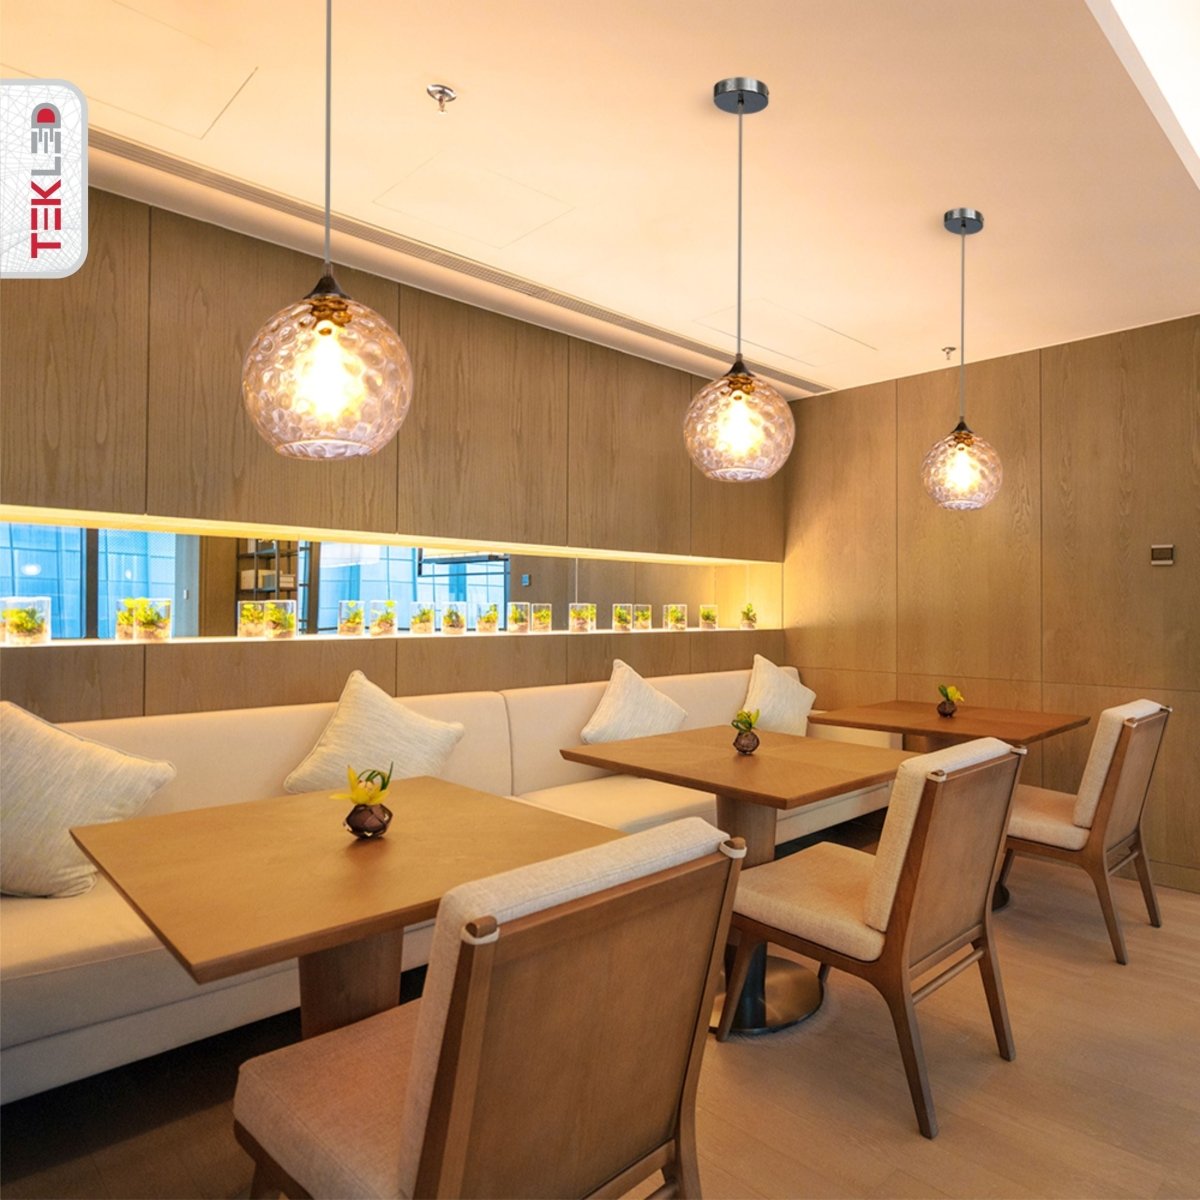 More interior usage of Clear Glass Pendant Light D200 with E27 Fitting | TEKLED 158-19670